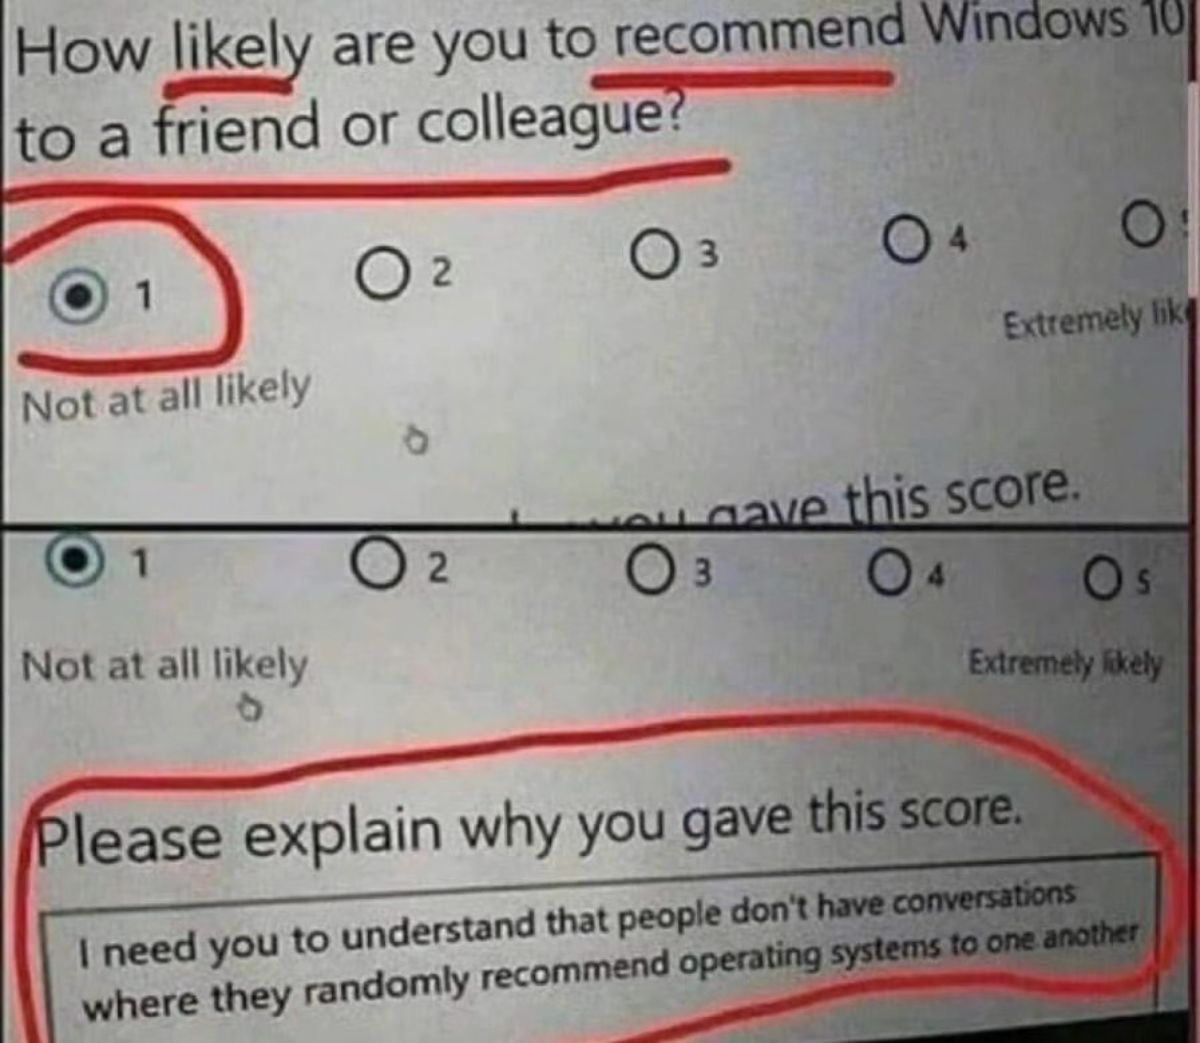 material - How ly are you to recommend Windows 10 to a friend or colleague? 0 2 01 Not at all ly 1 Not at all ly d d 02 03 04 0 3 Extremely lik gave this score. 04 Os Extremely ly Please explain why you gave this score. I need you to understand that peopl